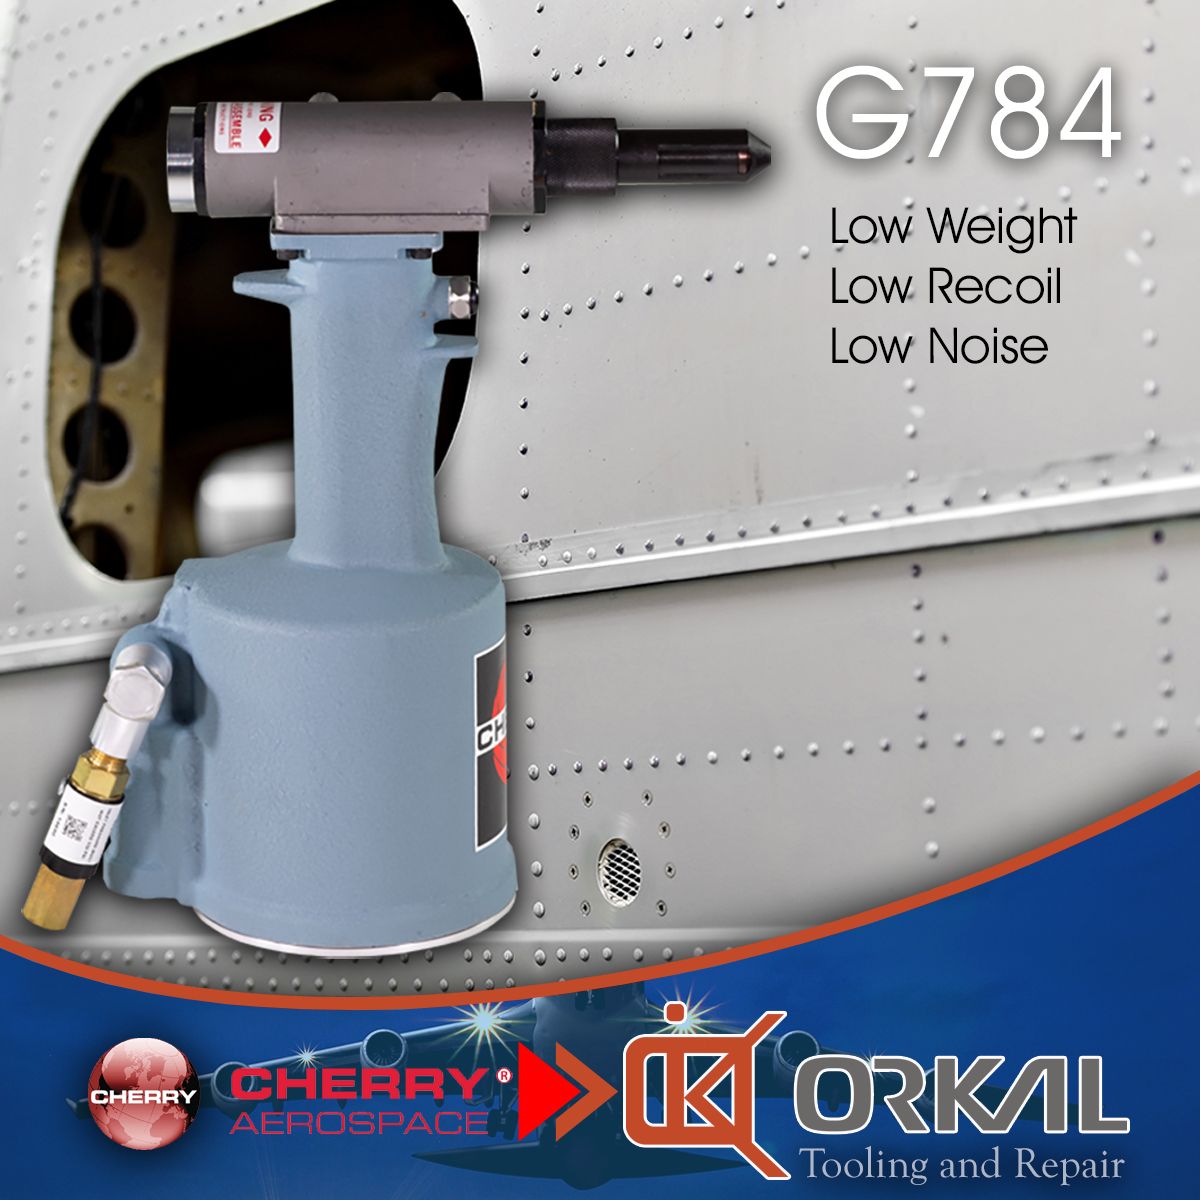 orkal, promotional image of the g784 by cherry aerospace and orkal industries: lightweight, low recoil, precision engineering—perfect for aircraft assembly and repair.